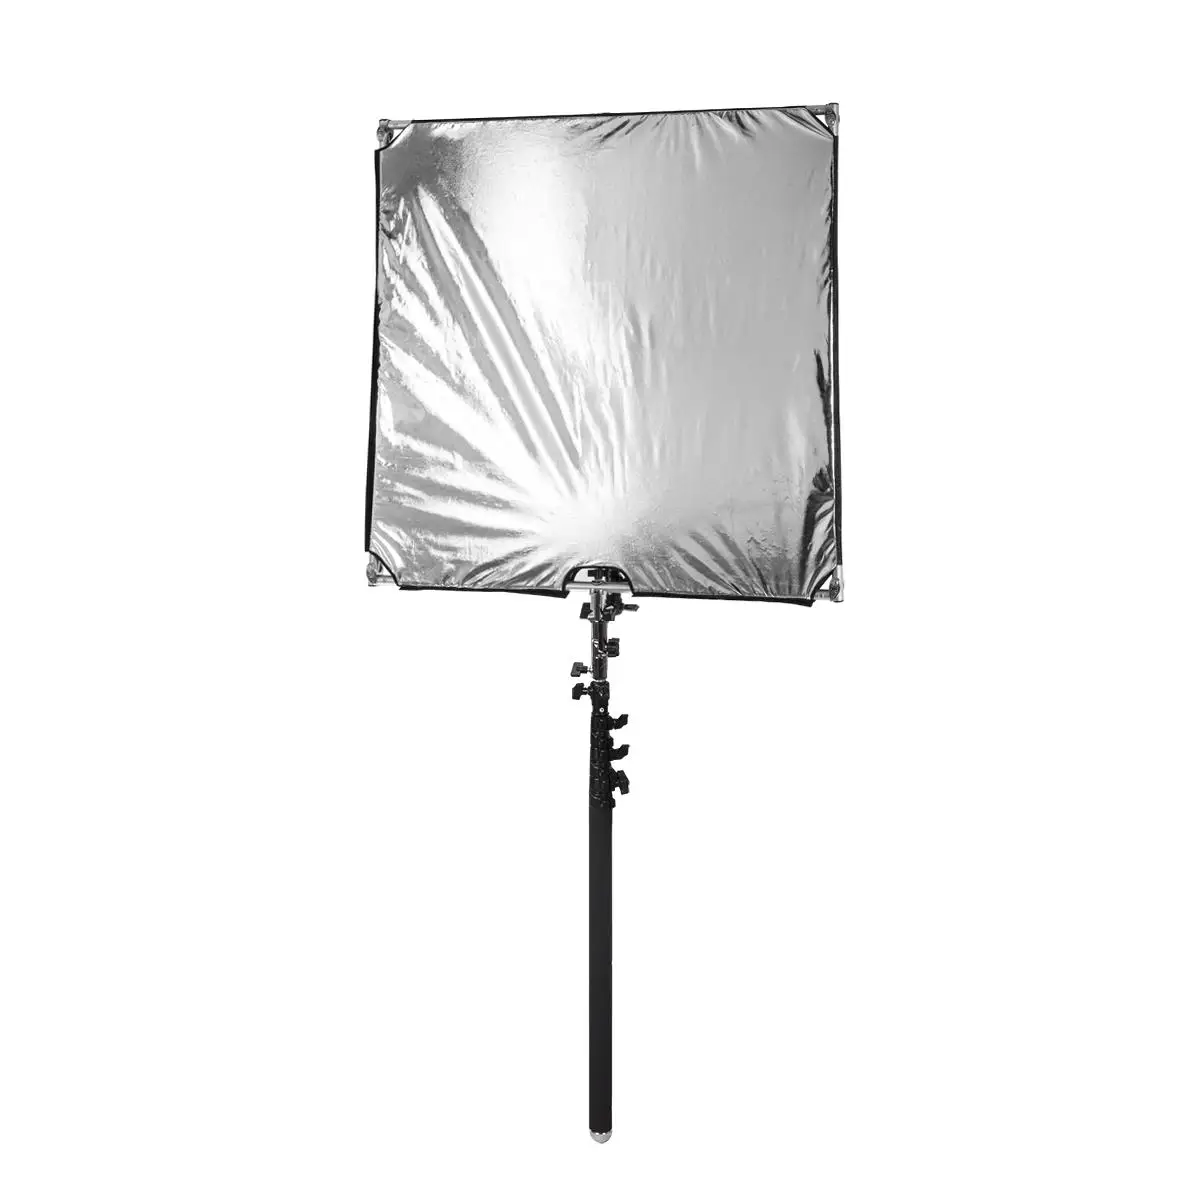 Collapsible Frame Diffusion & Silver/White Reflector Kit with Boom Handle and Carry Bag Pro Studio Solutions 145cm x 145cm Boom Sun Scrim 57in x 57in 